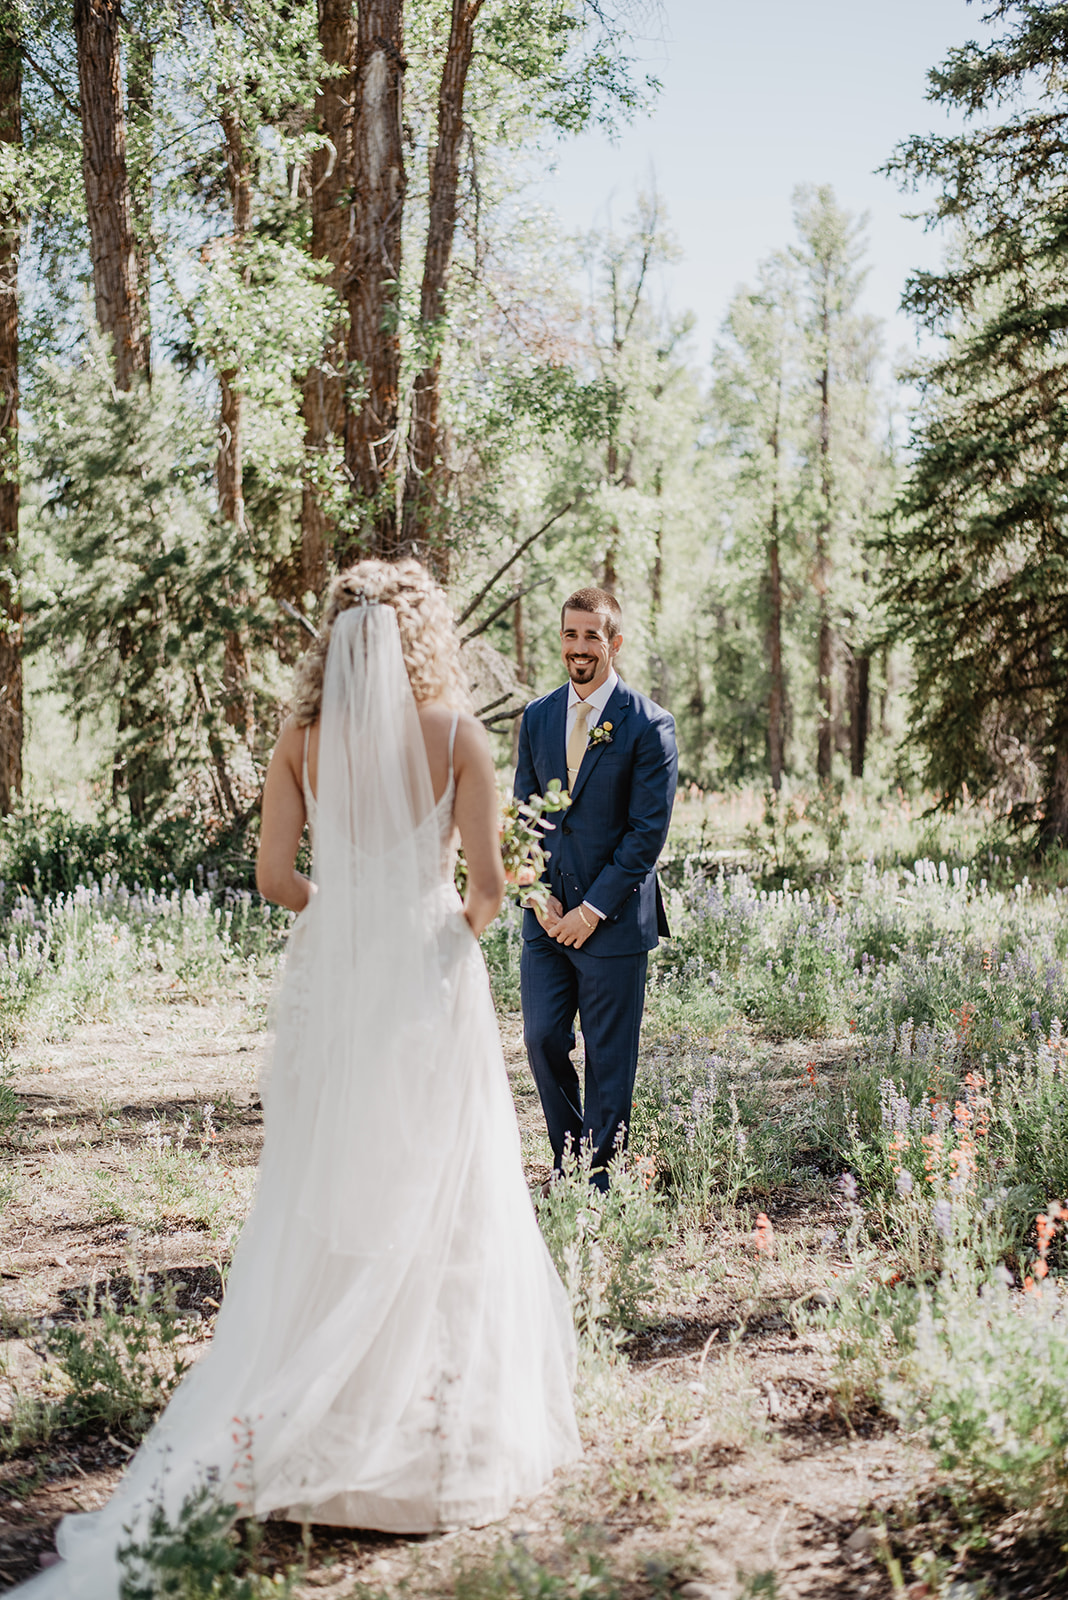 grooms reaction to his bride for their first look in the woods of the Grand Tetons with small wild flowers surrounding them